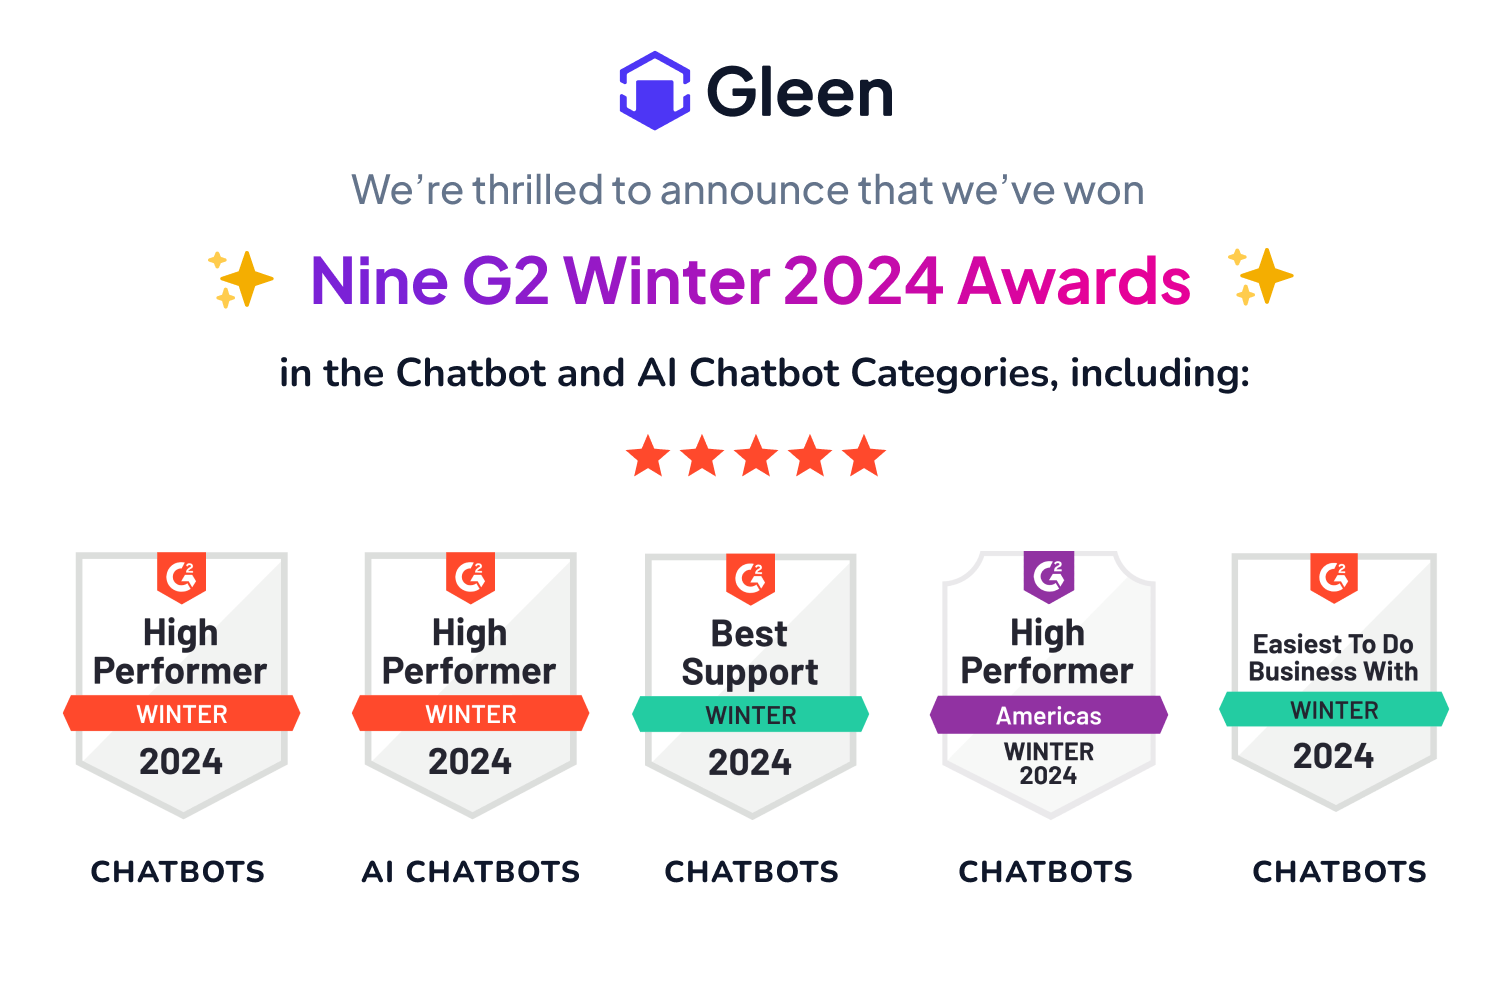 Gleen Wins Nine G2 Winter 2024 Awards in Chatbots & AI Chatbots Categories